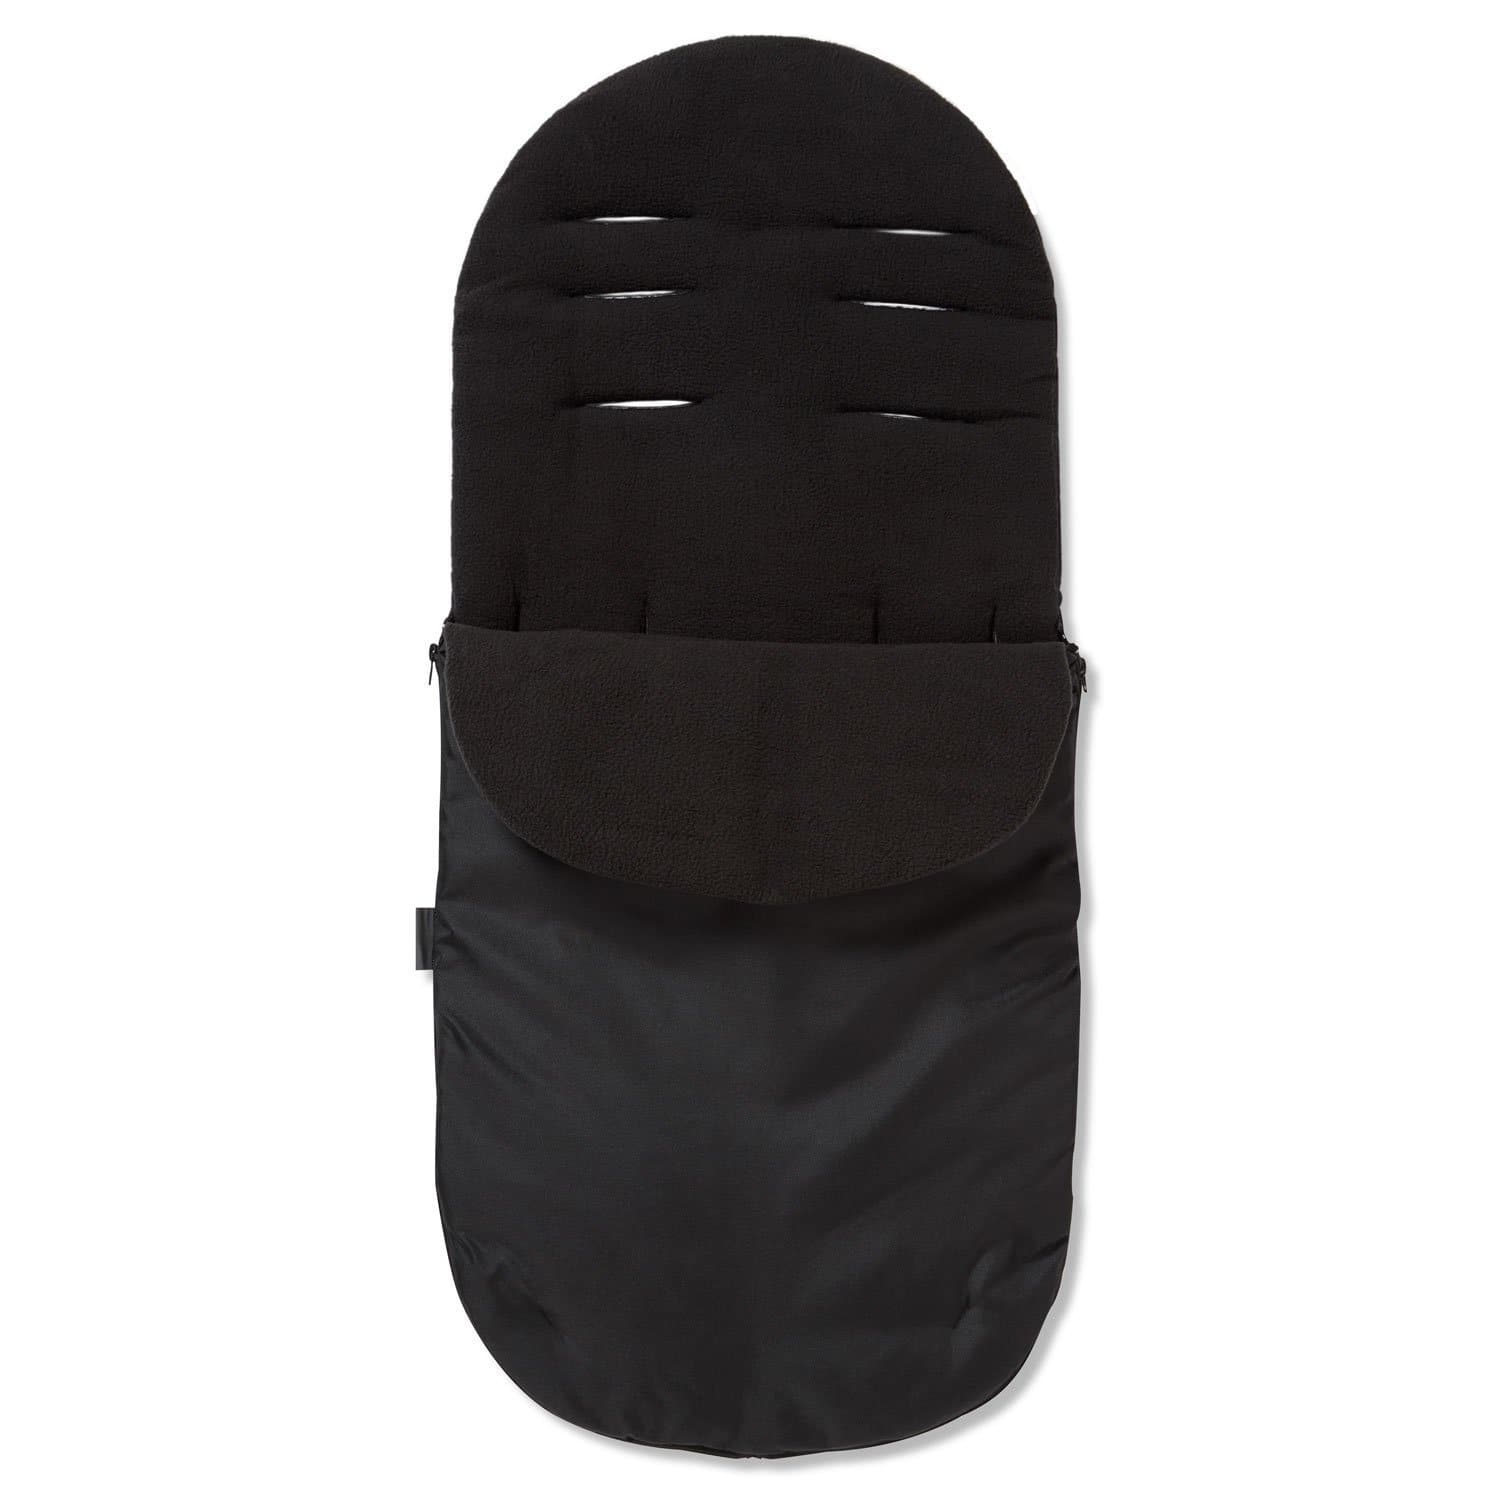 Footmuff / Cosy Toes Compatible with Babyzen - Black / Fits All Models | For Your Little One